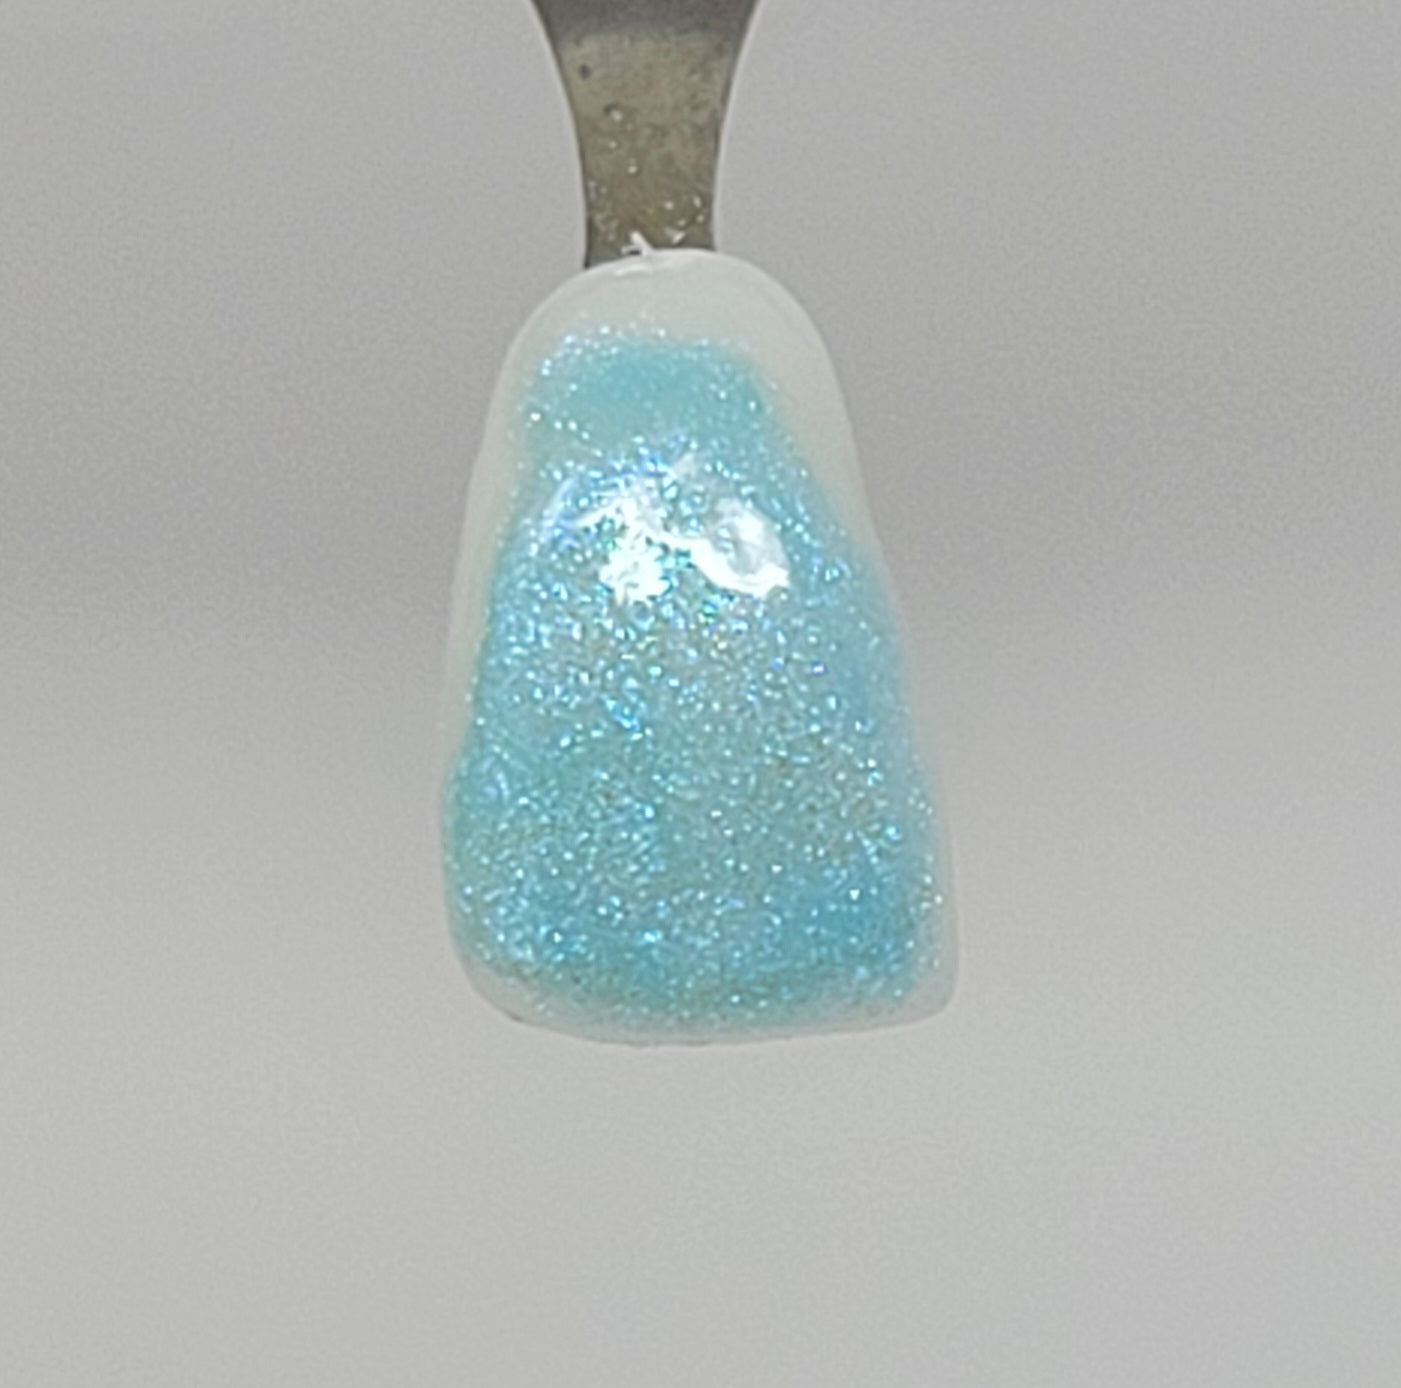 Sky Opal Temporary Tattooth Colorant on a demo tooth.  These colorants can be applied to teeth to temporarily alter their color or iridescence.